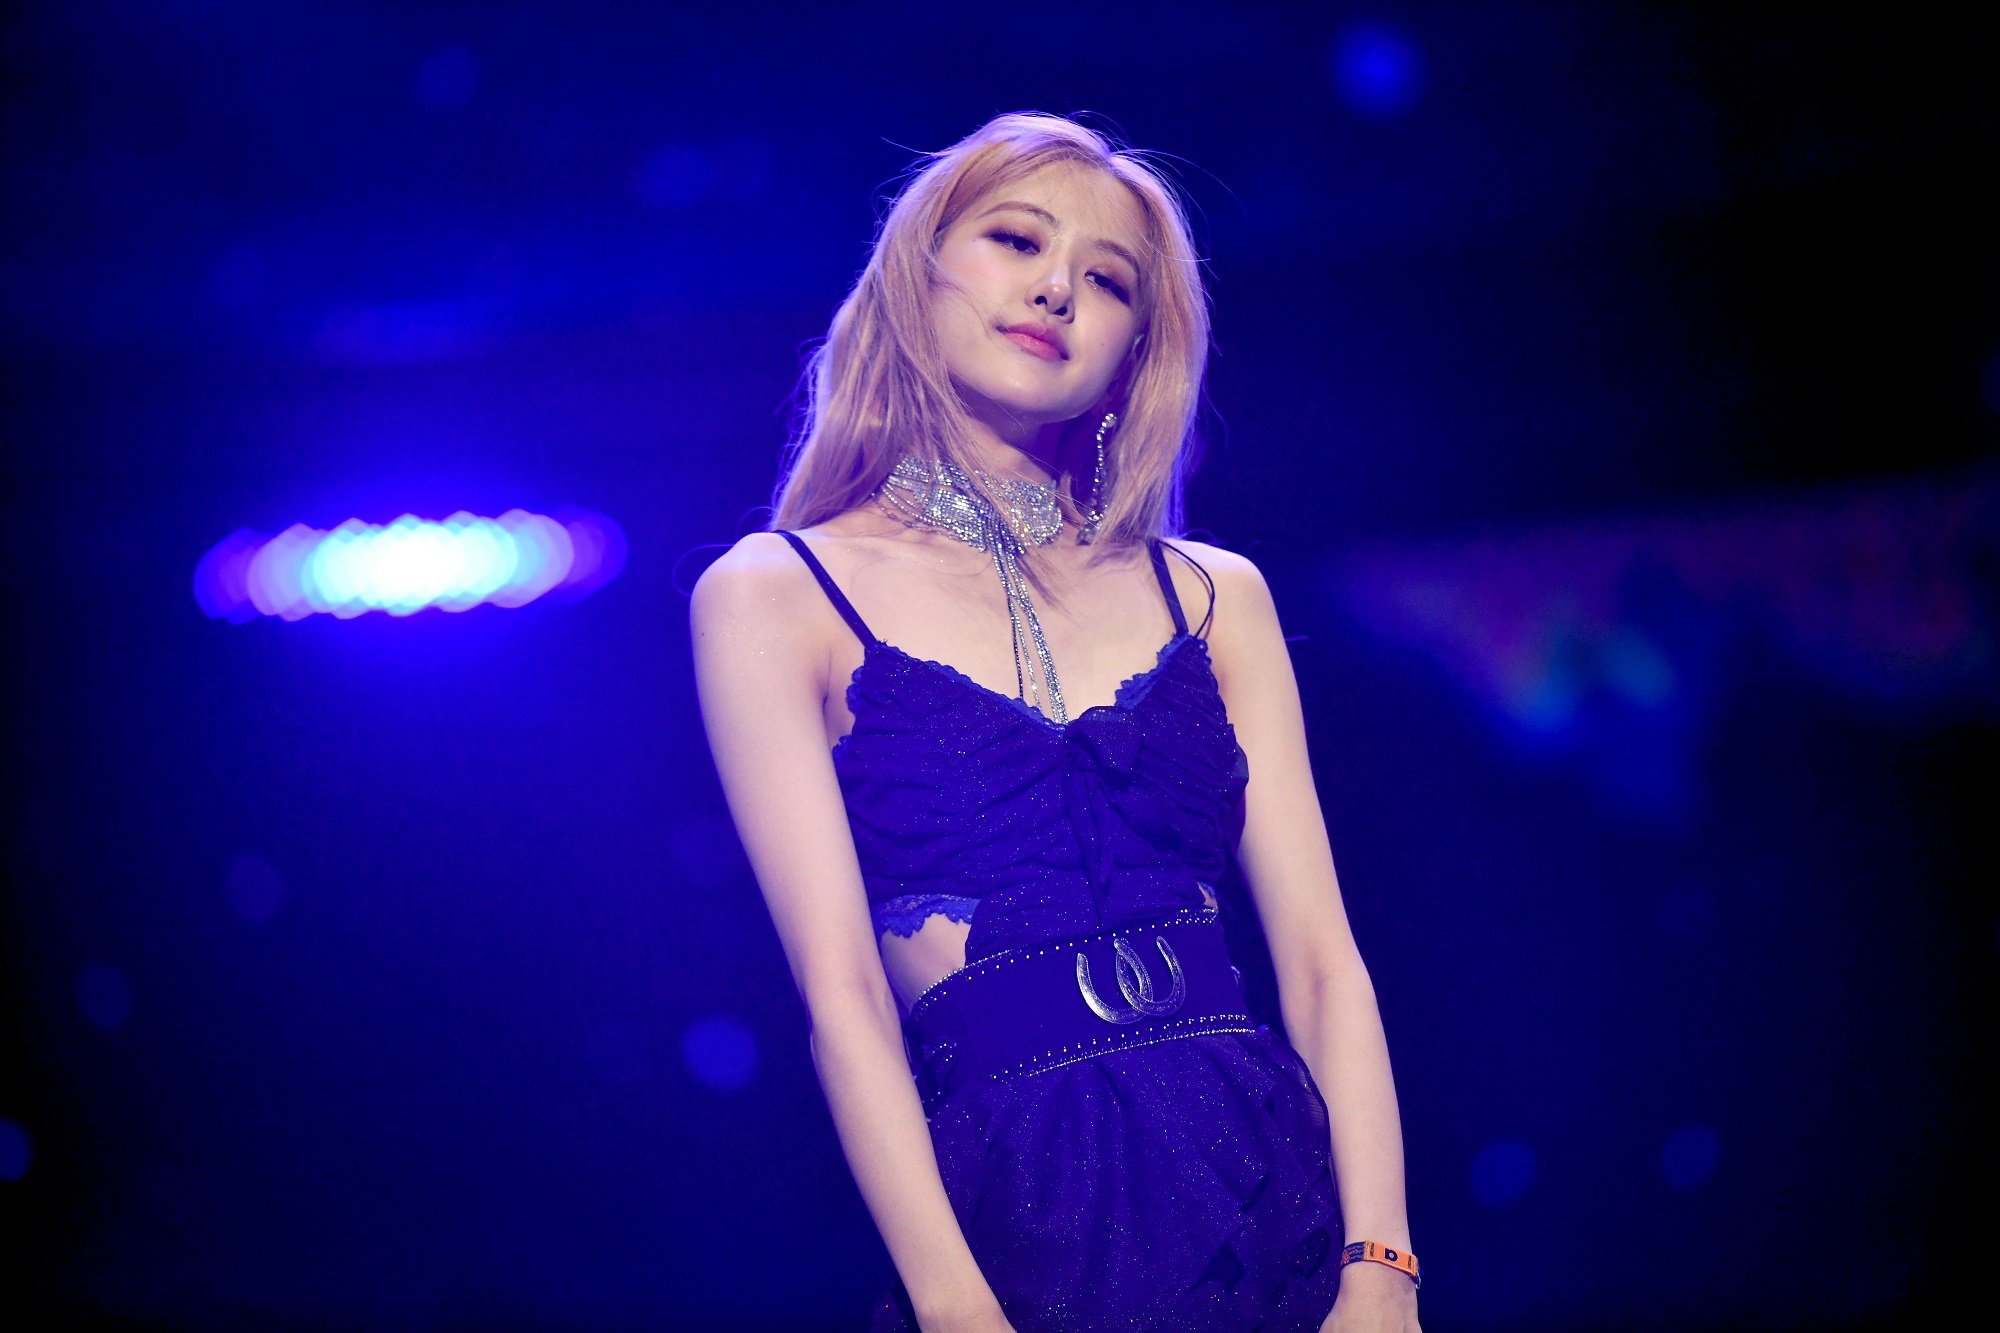 Rosé of BLACKPINK onstage during the K-pop group's 2019 Coachella performance